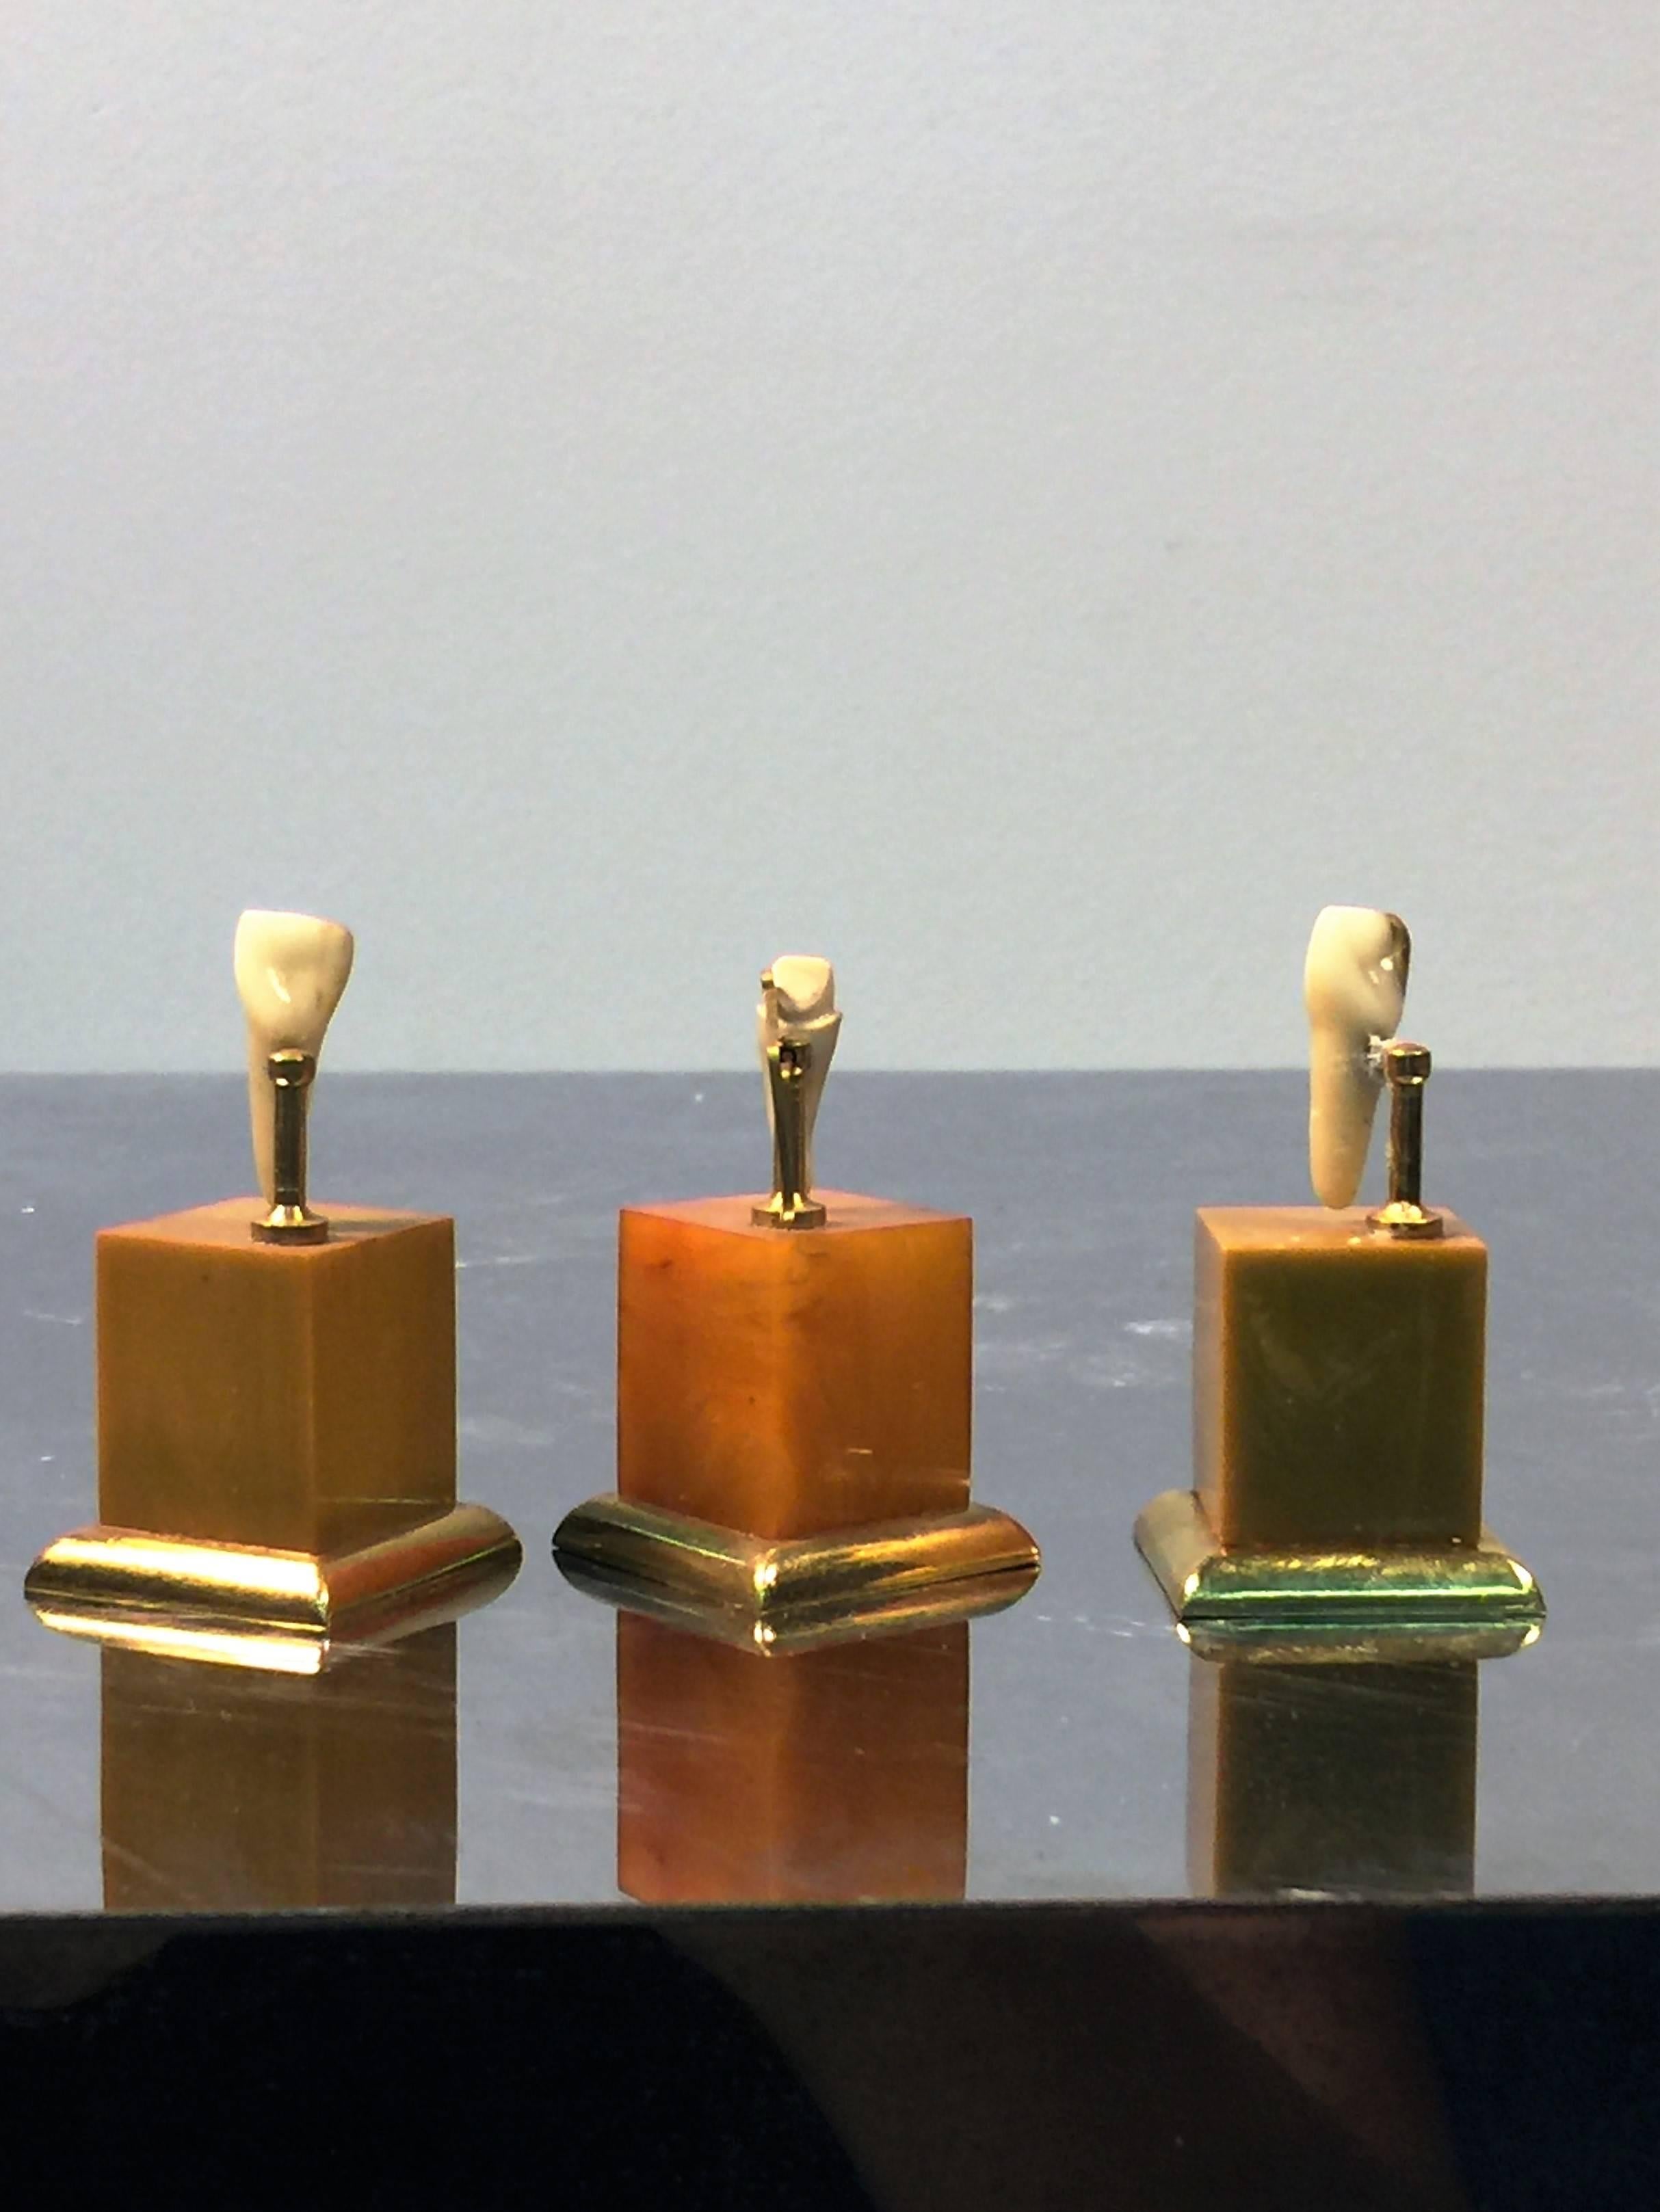 Interesting boxed set of three tooth samples exhibiting 10-karat gold fillings used in the 1930s.This sample set was brought around to dentists so they can buy the tooth filling product for their dentistry practice. Mounted on varying shades of